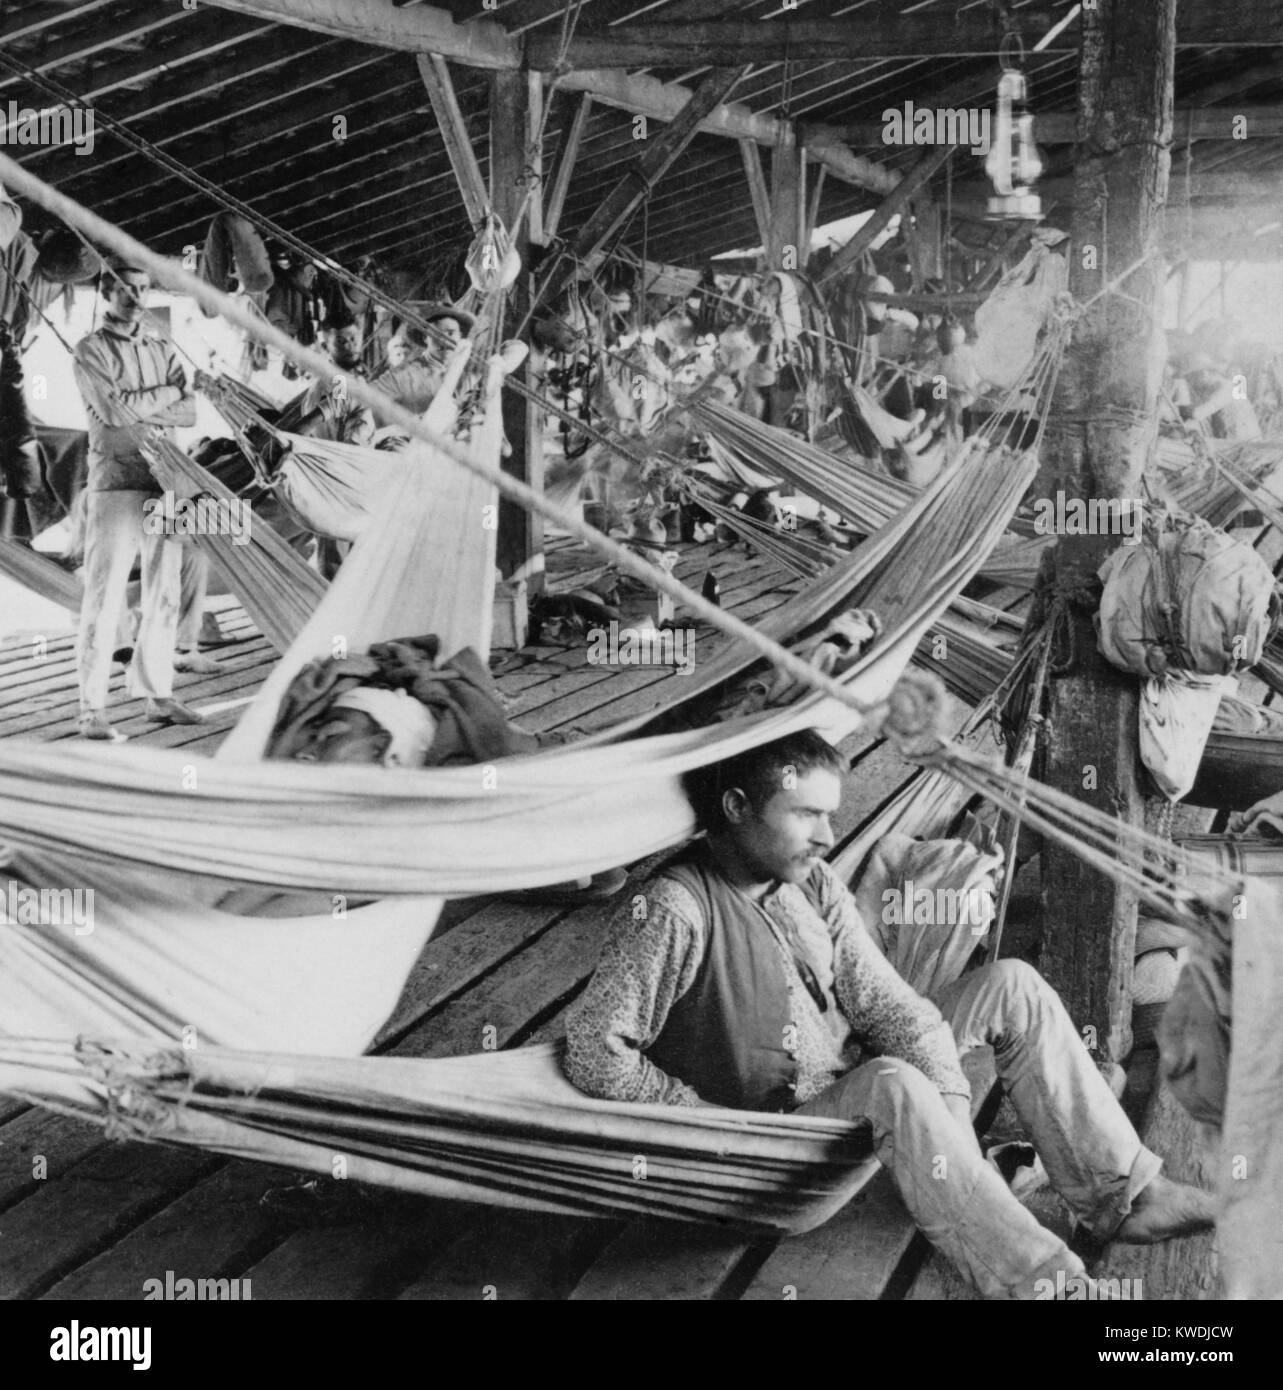 Primitive conditions in the last Spanish POW camp in Cienfuegos, Cuba ca. 1898. US agreed to transport the Spanish garrison back to Spain in terms of surrender at Santiago (BSLOC 2017 10 56) Stock Photo